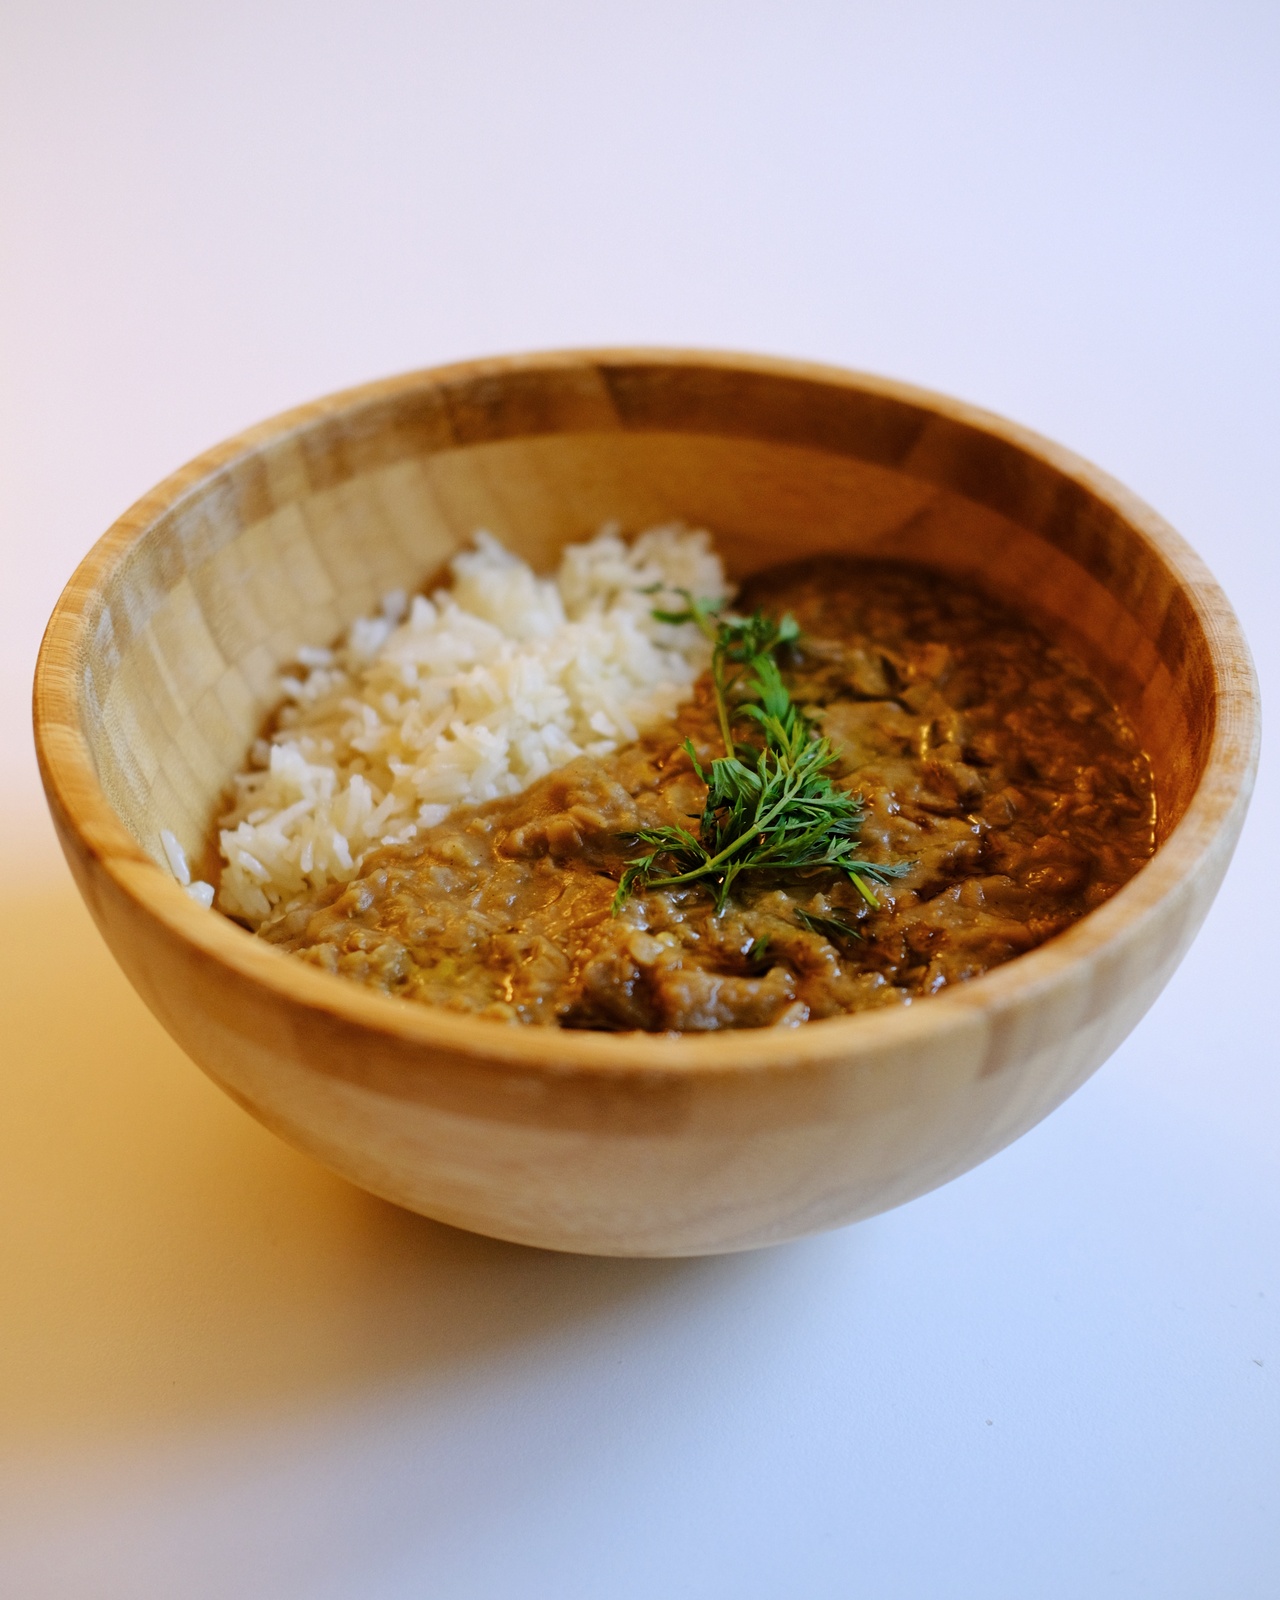 Lentil-aubergine-pomegranate stew served with rice in wooden bowl, in my kitchen in Amsterdam, 2021.